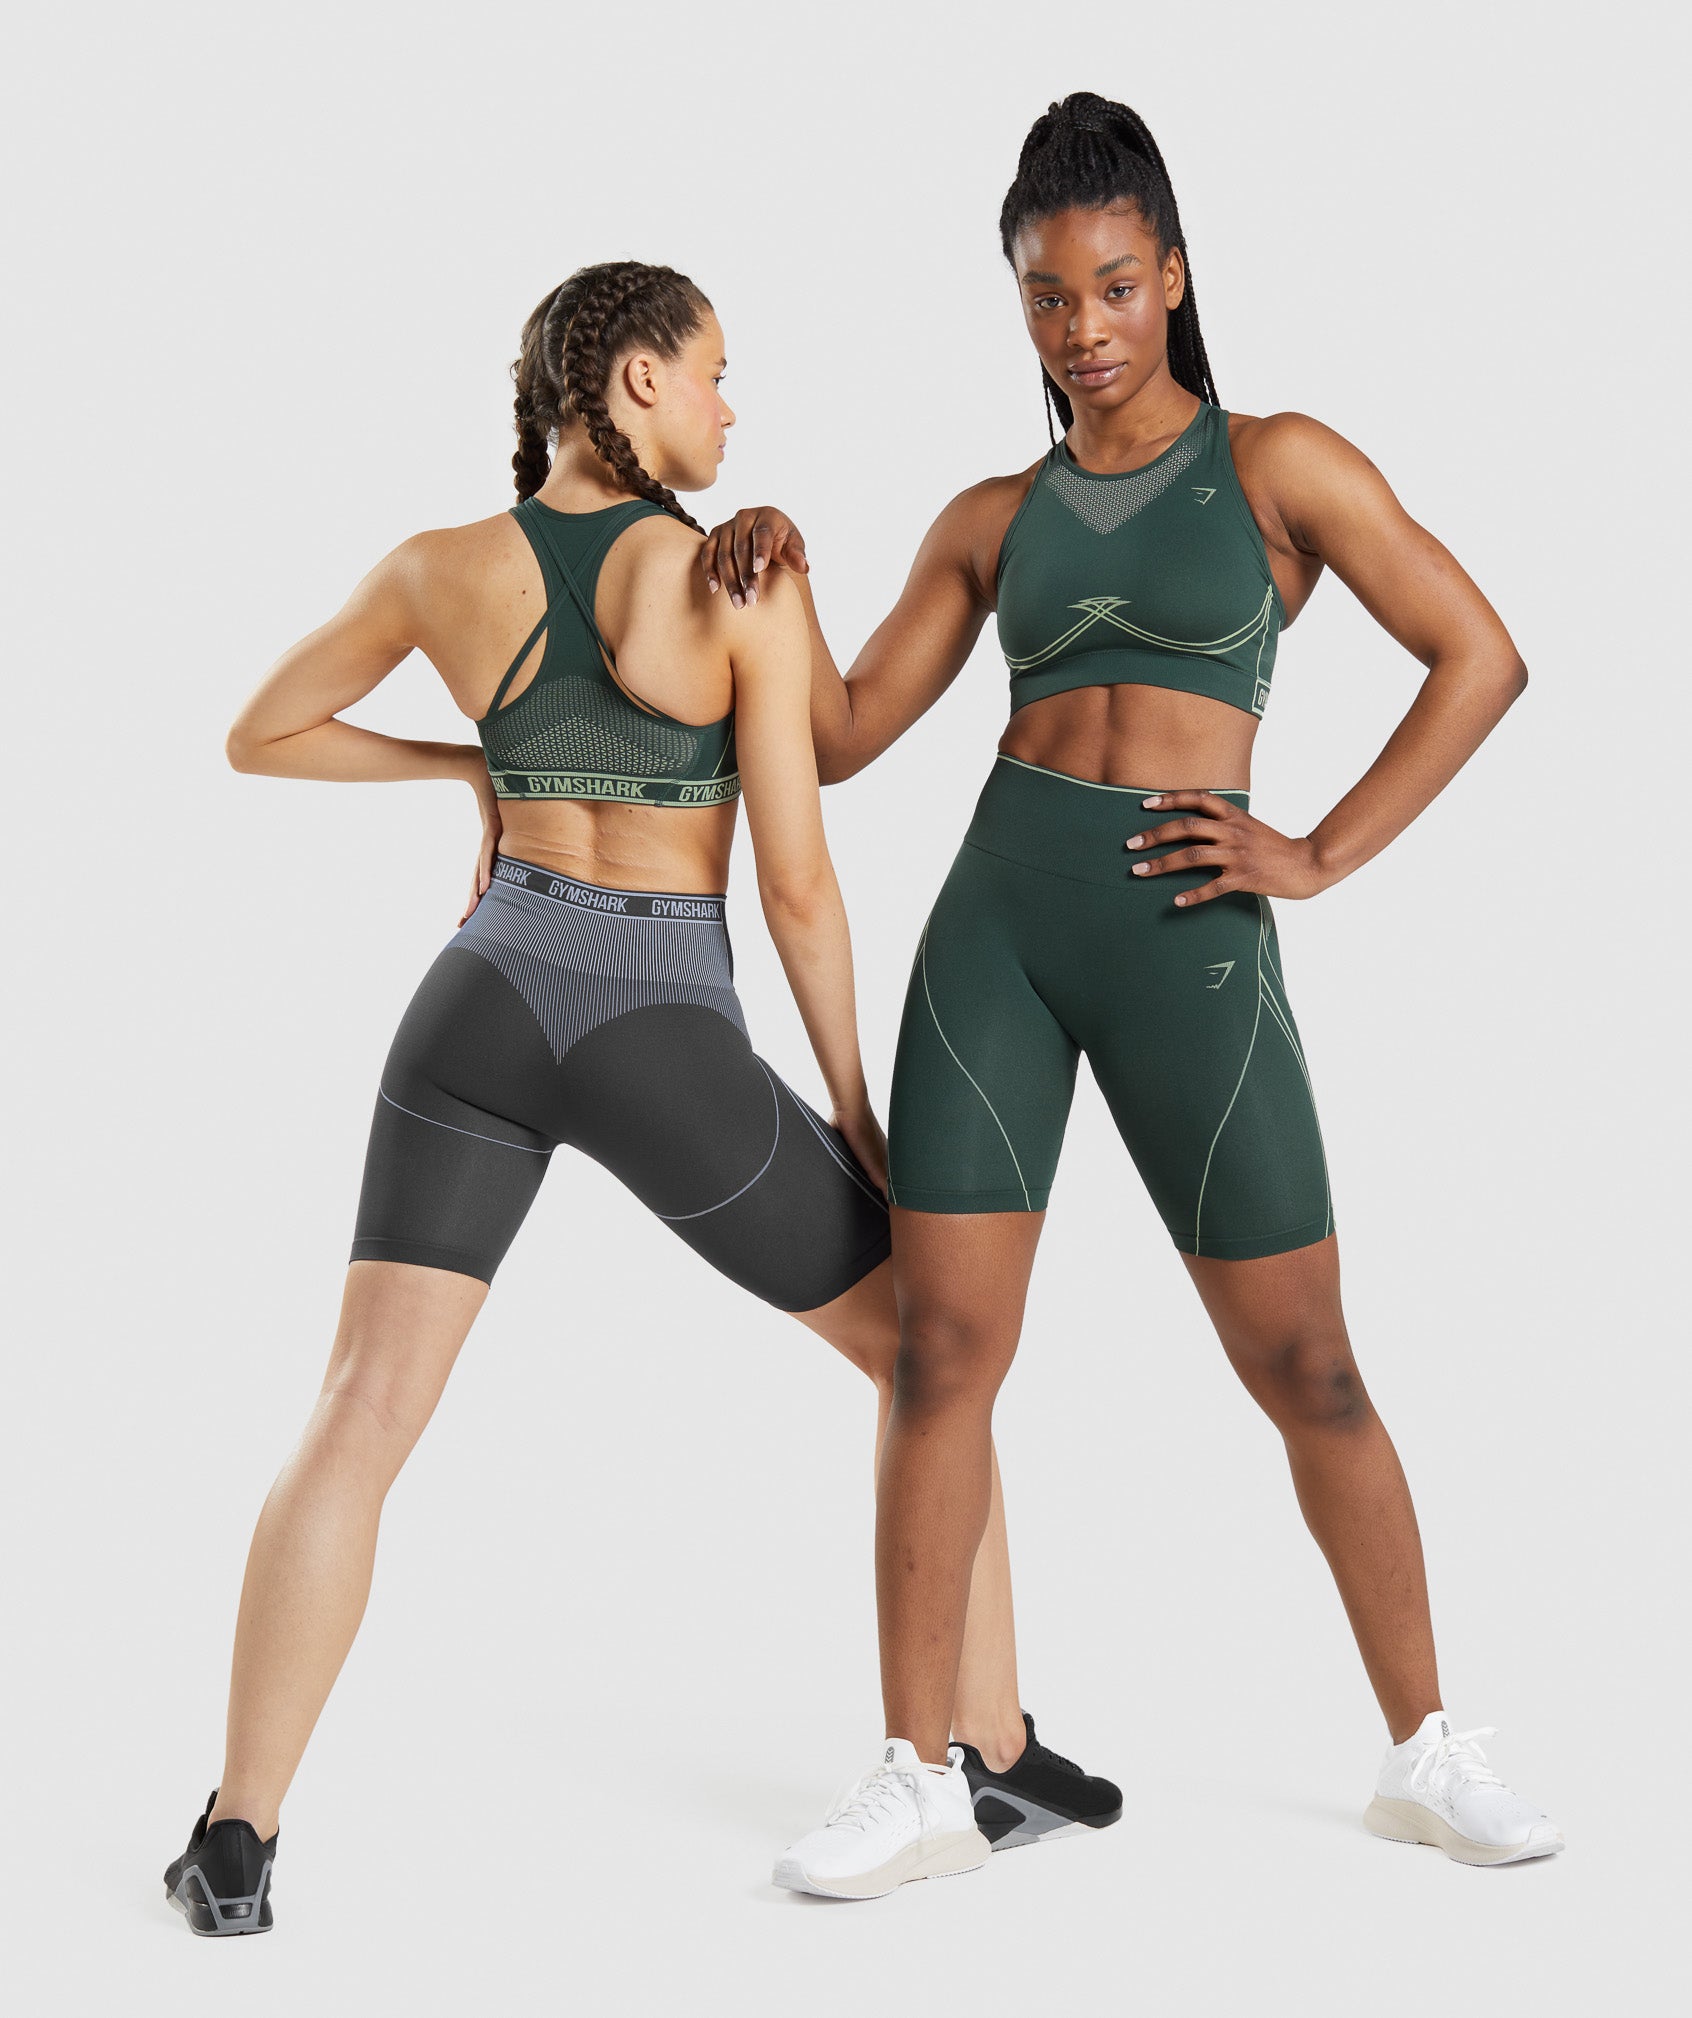 Zella Seamless Sports Bra Top Yoga Racerback Scoop Neck Workout Marled  Green S - $17 - From Michelle